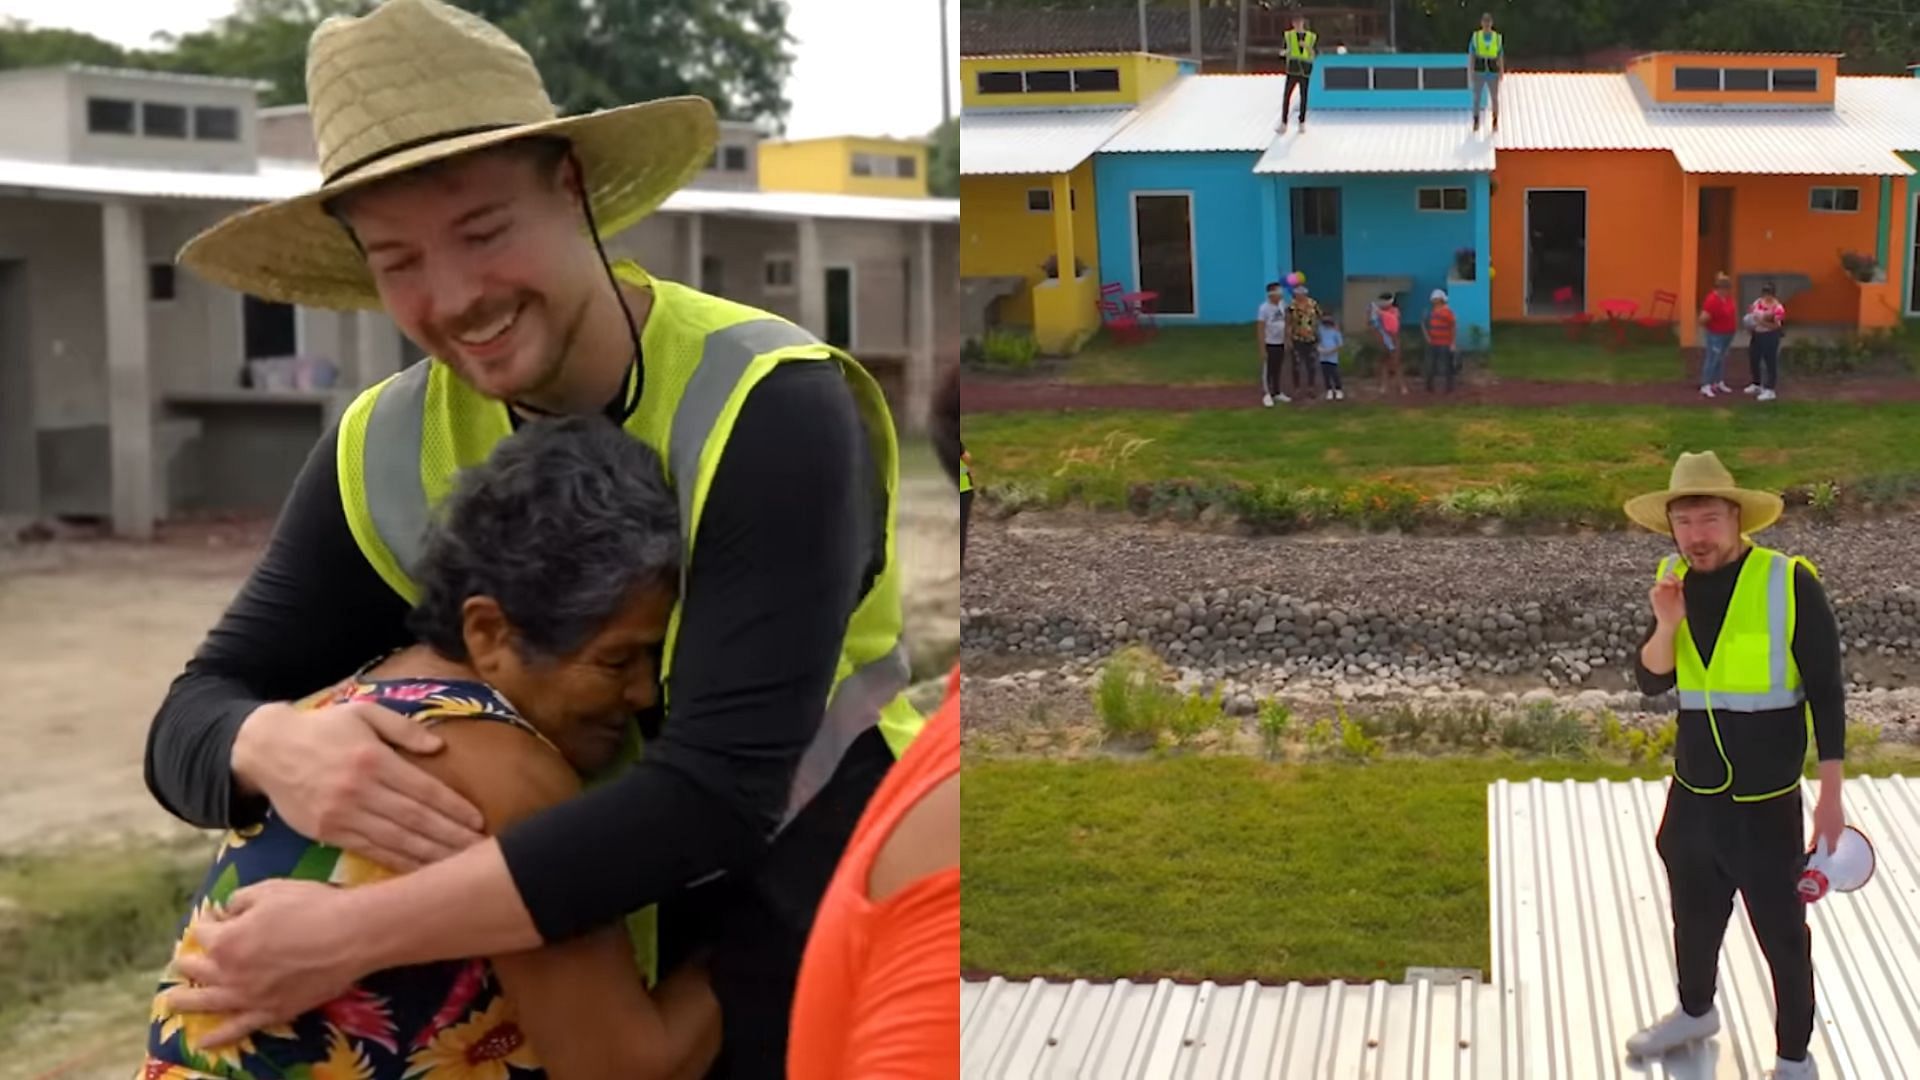 MrBeast provided free houses to families in need across various countries (Image via MrBeast/YouTube)